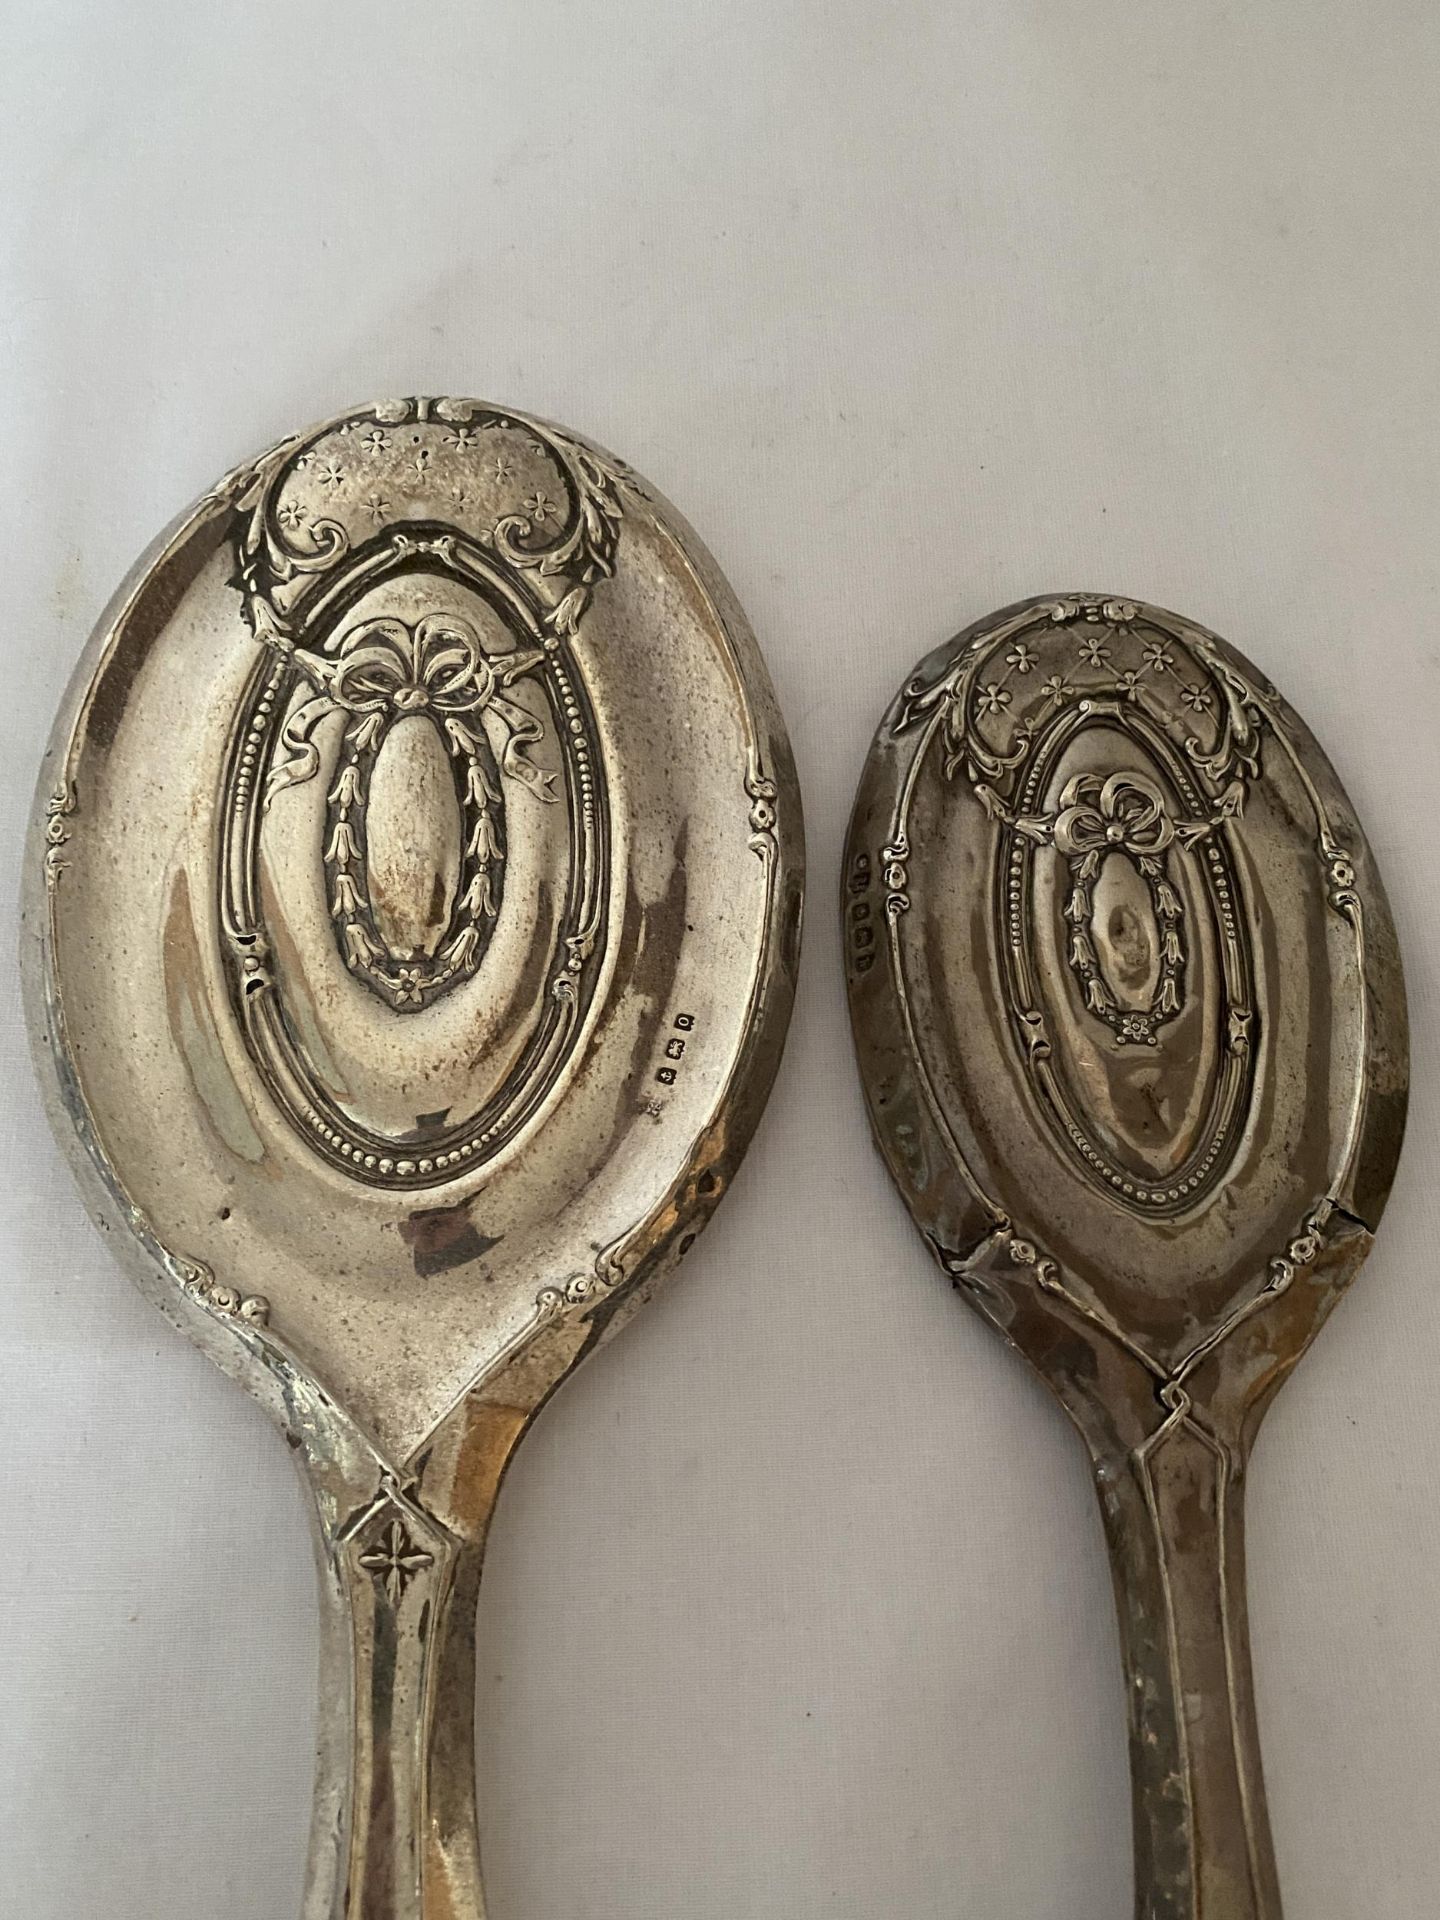 TWO HALLMARKED BIRMINGHAM SILVER BACKED HAND MIRRORS, EARLIEST DATING TO 1913 - Image 4 of 18